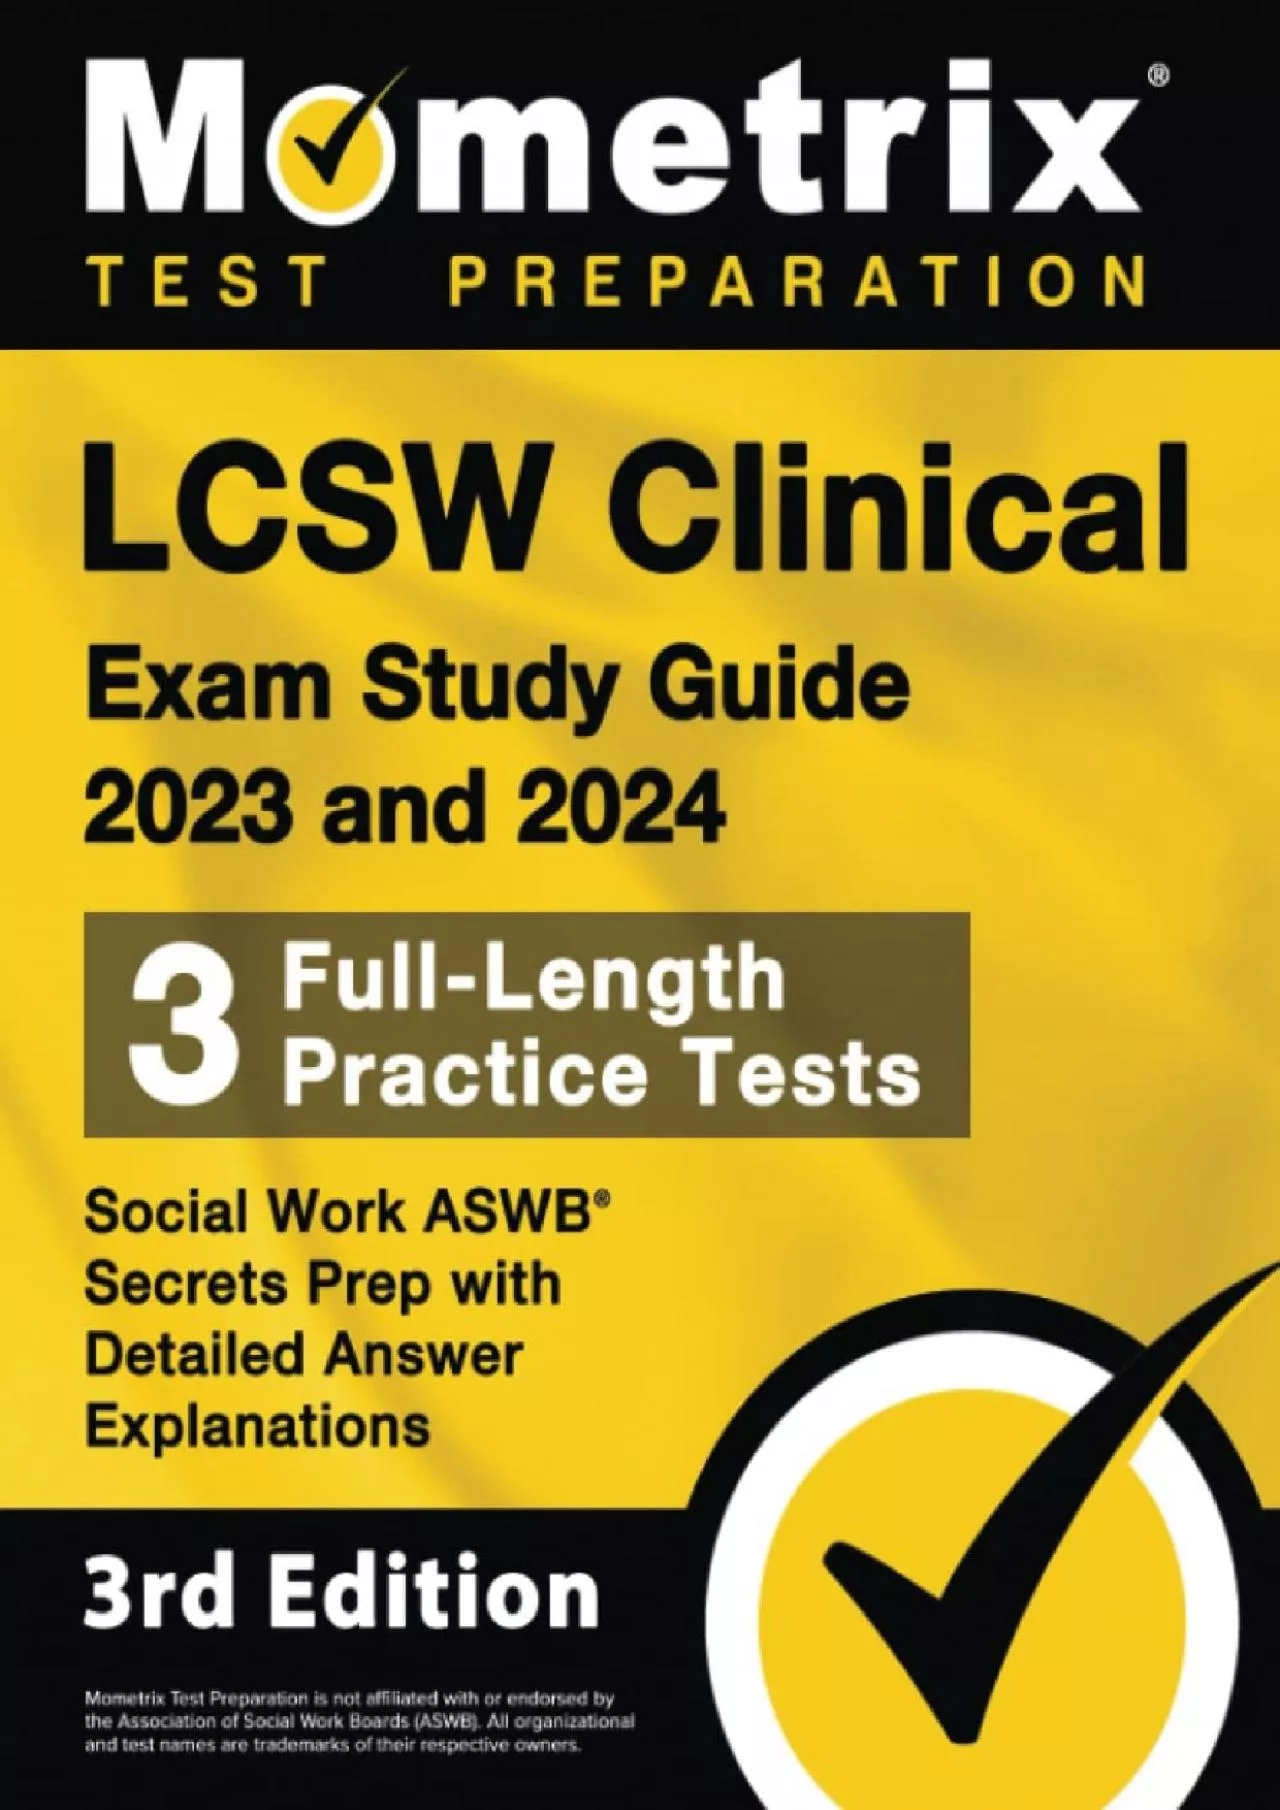 [DOWNLOAD] LCSW Clinical Exam Study Guide 2023 and 2024 - 3 Full-Length Practice Tests,